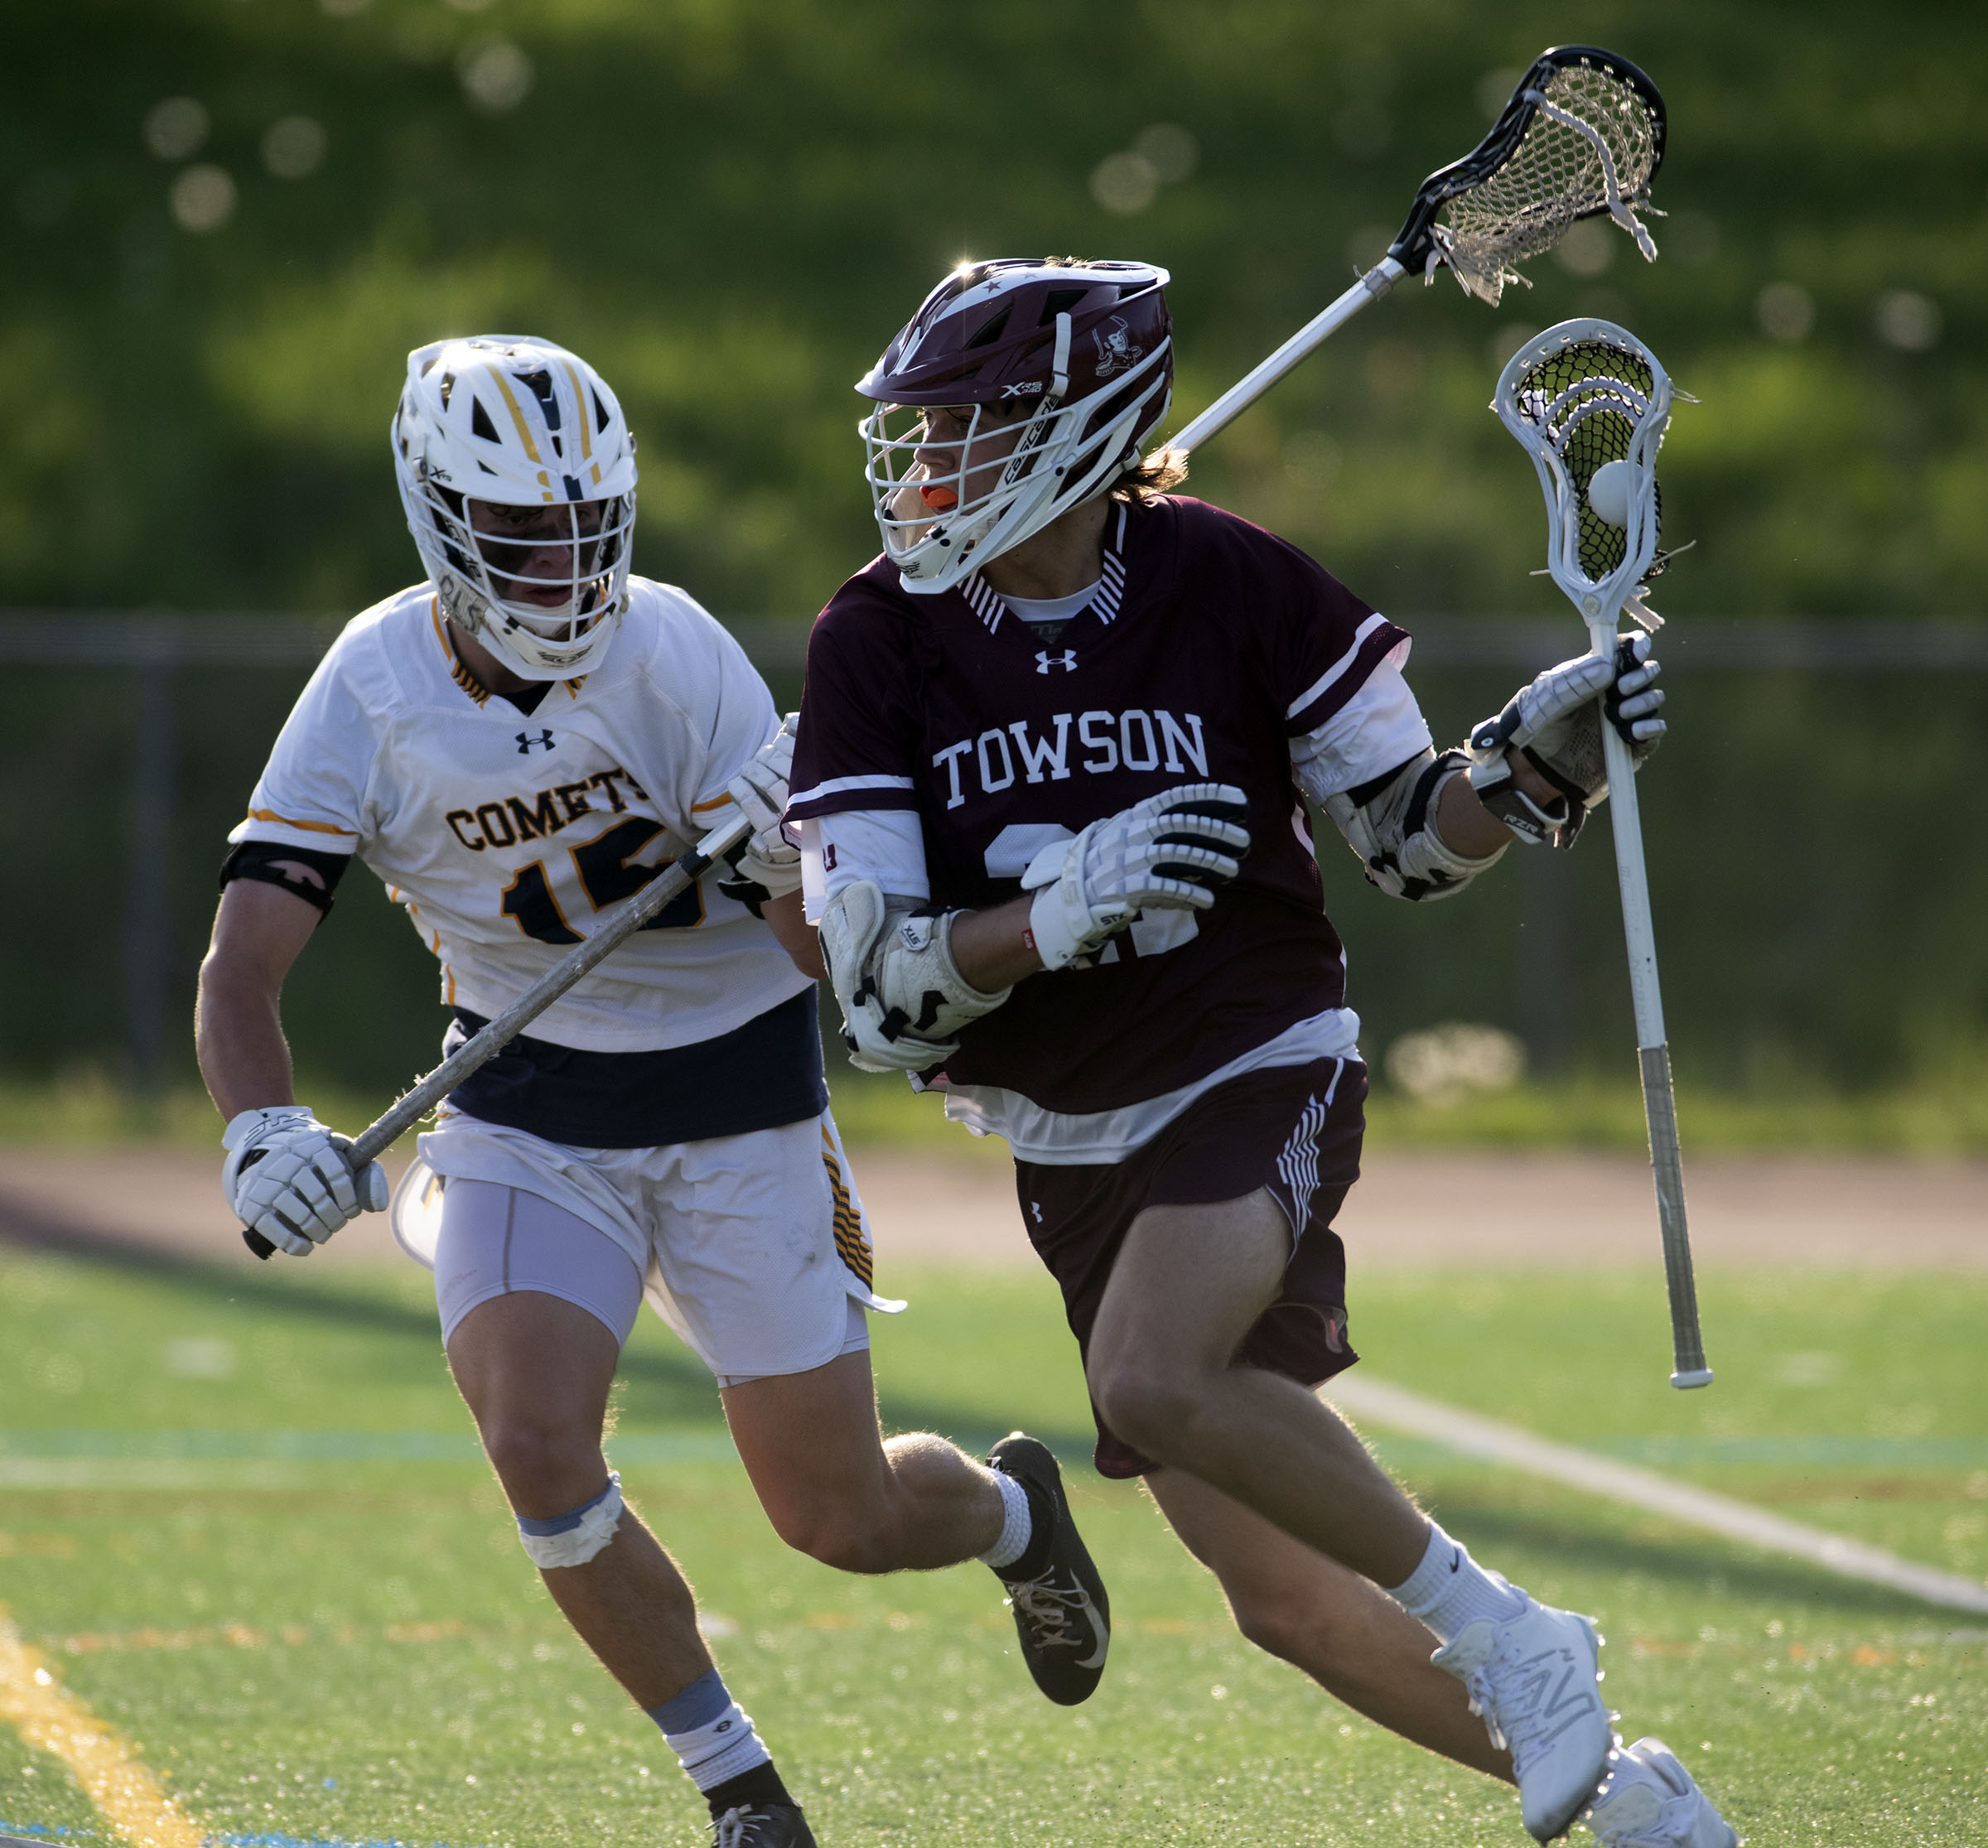 Towson’s Connor Parks, right, moves the ball against Catonsville’s Sam...